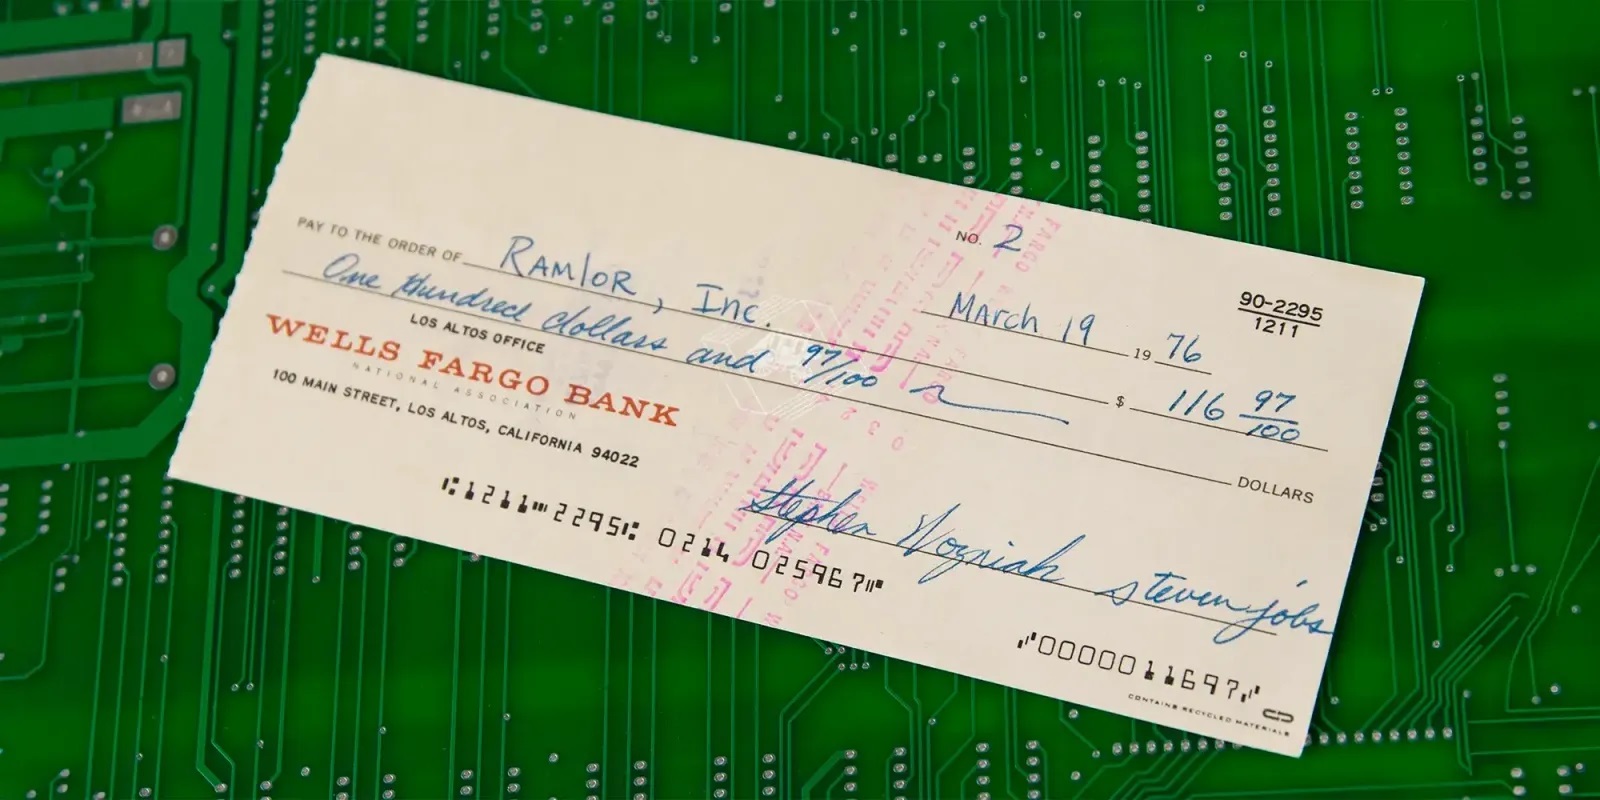 A 1976 Apple cheque signed by Jobs and Wozniak sold at auction for $135,000